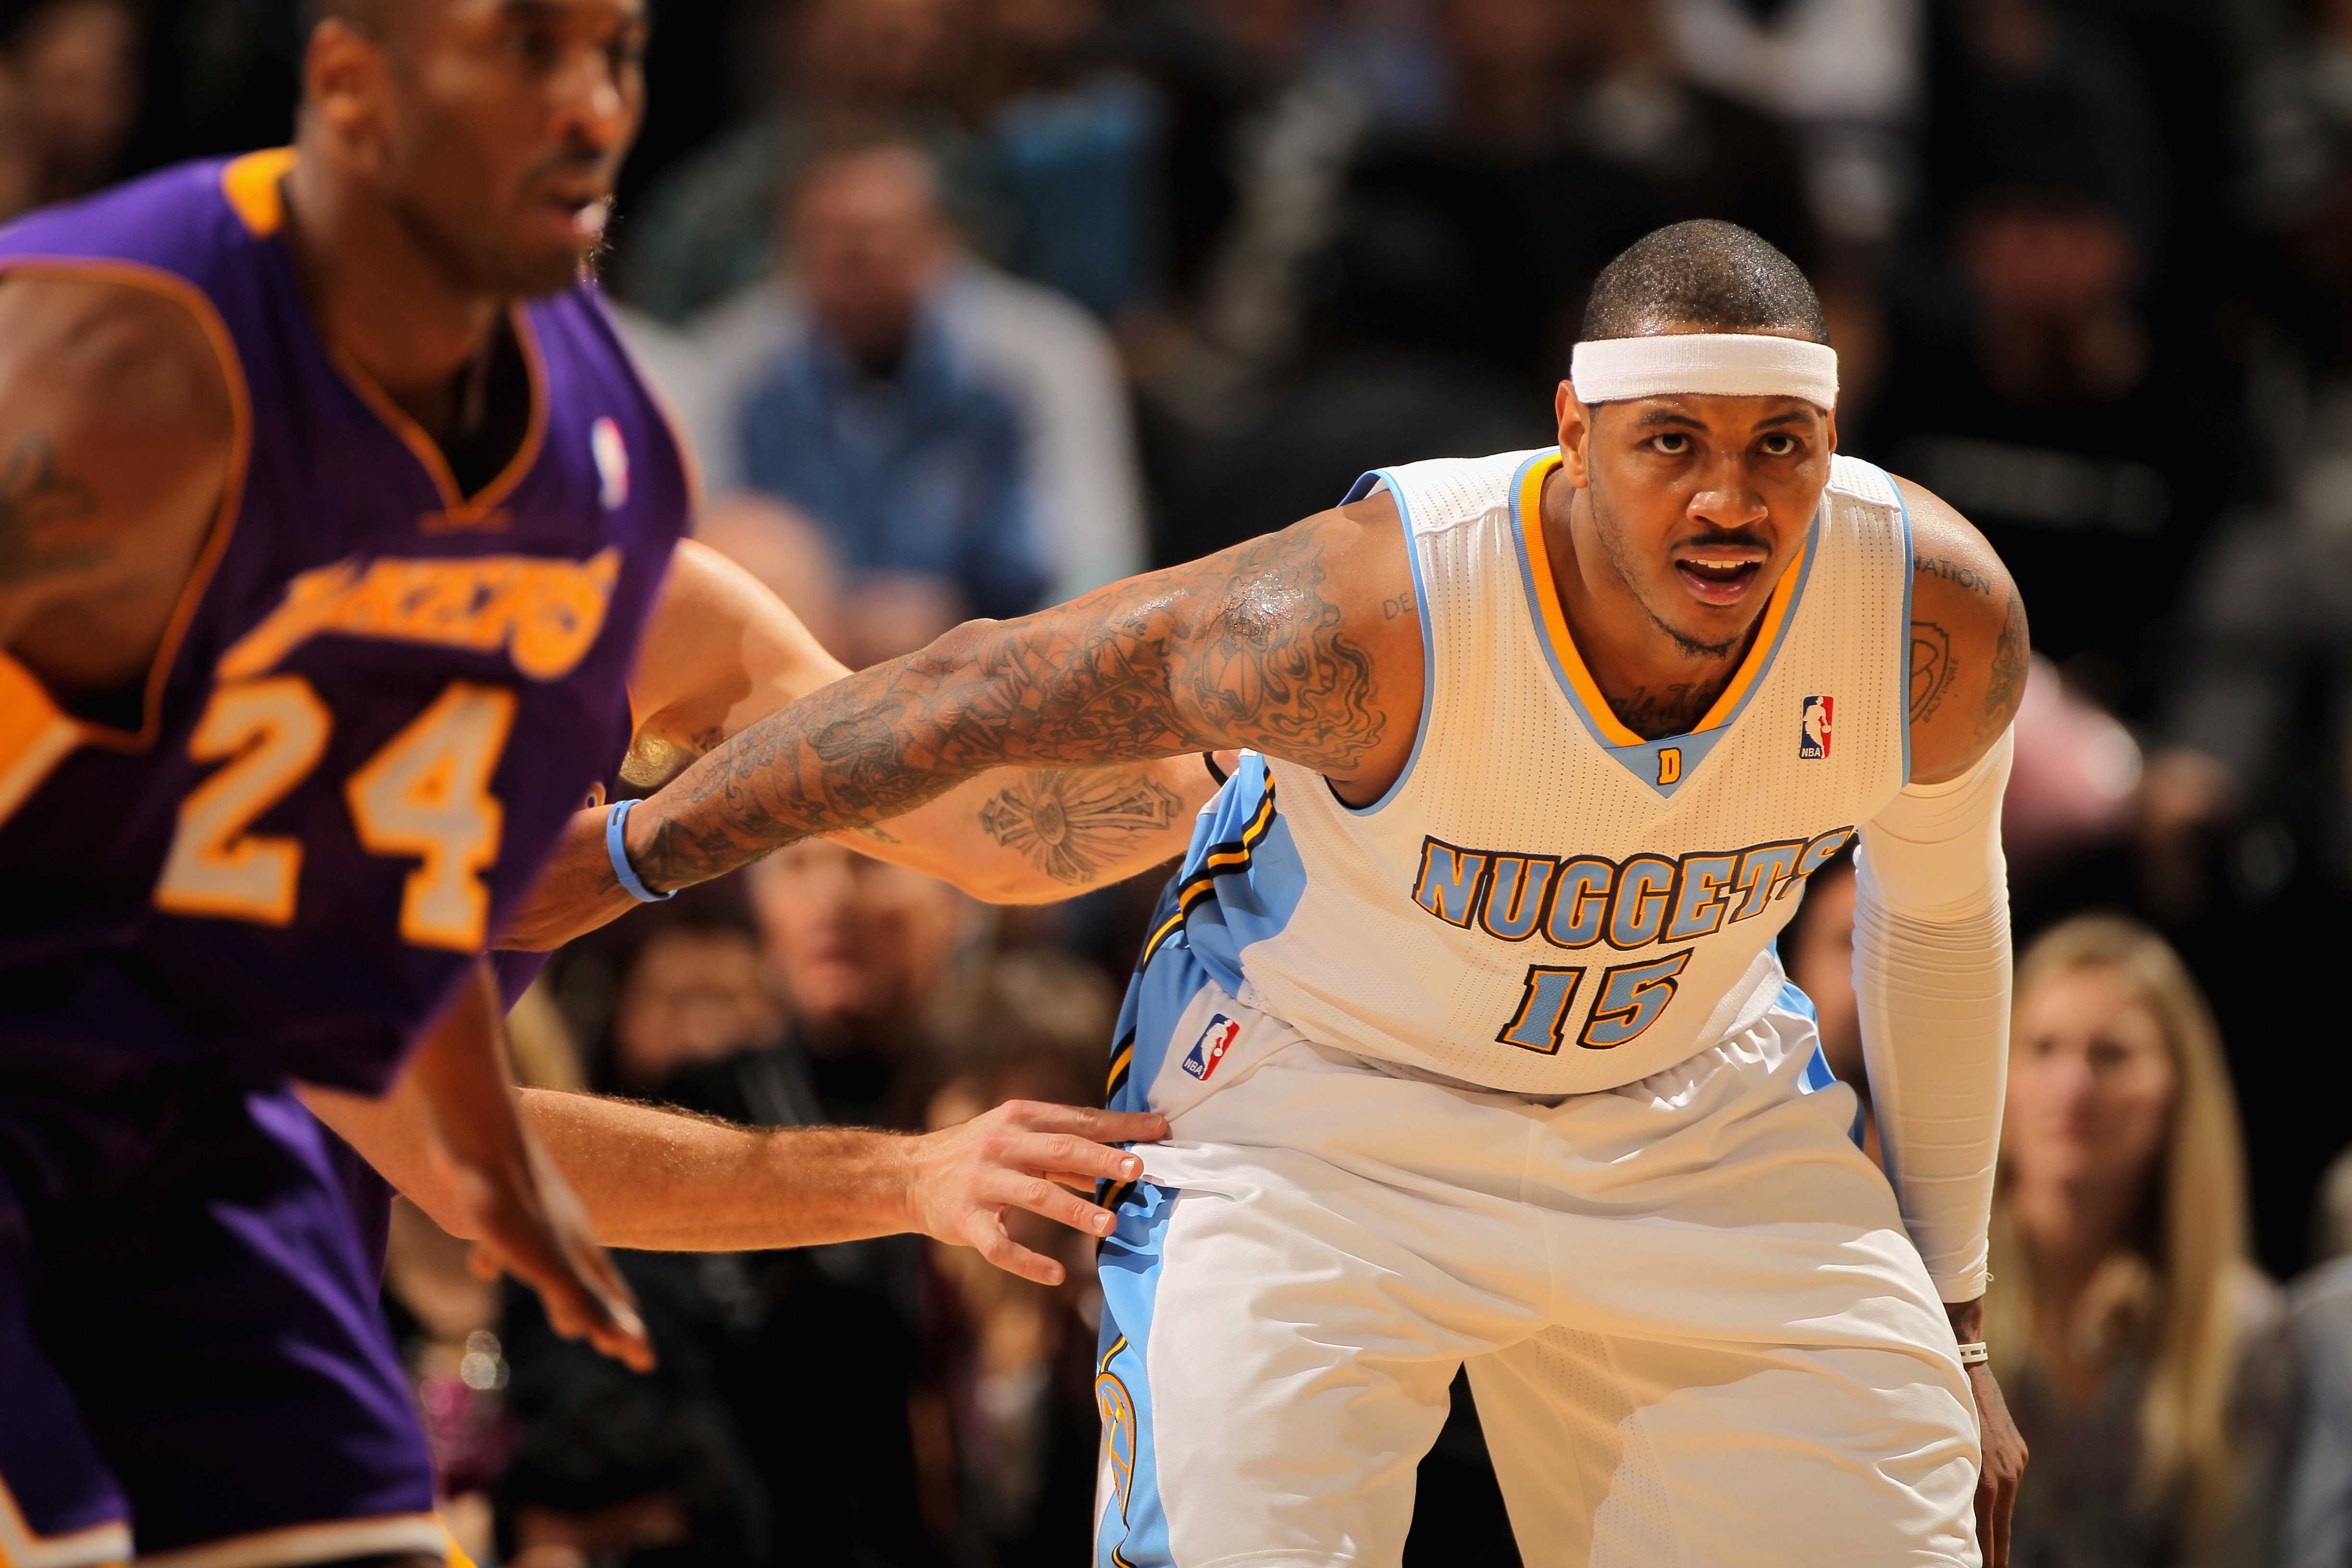 DENVER, CO - JANUARY 21:  Carmelo Anthony #15 of the Denver Nuggets gets open and lookls for the ball against the Los Angeles Lakers at the Pepsi Center on January 21, 2011 in Denver, Colorado. The Lakers defeated the Nuggets 107-97. NOTE TO USER: User ex